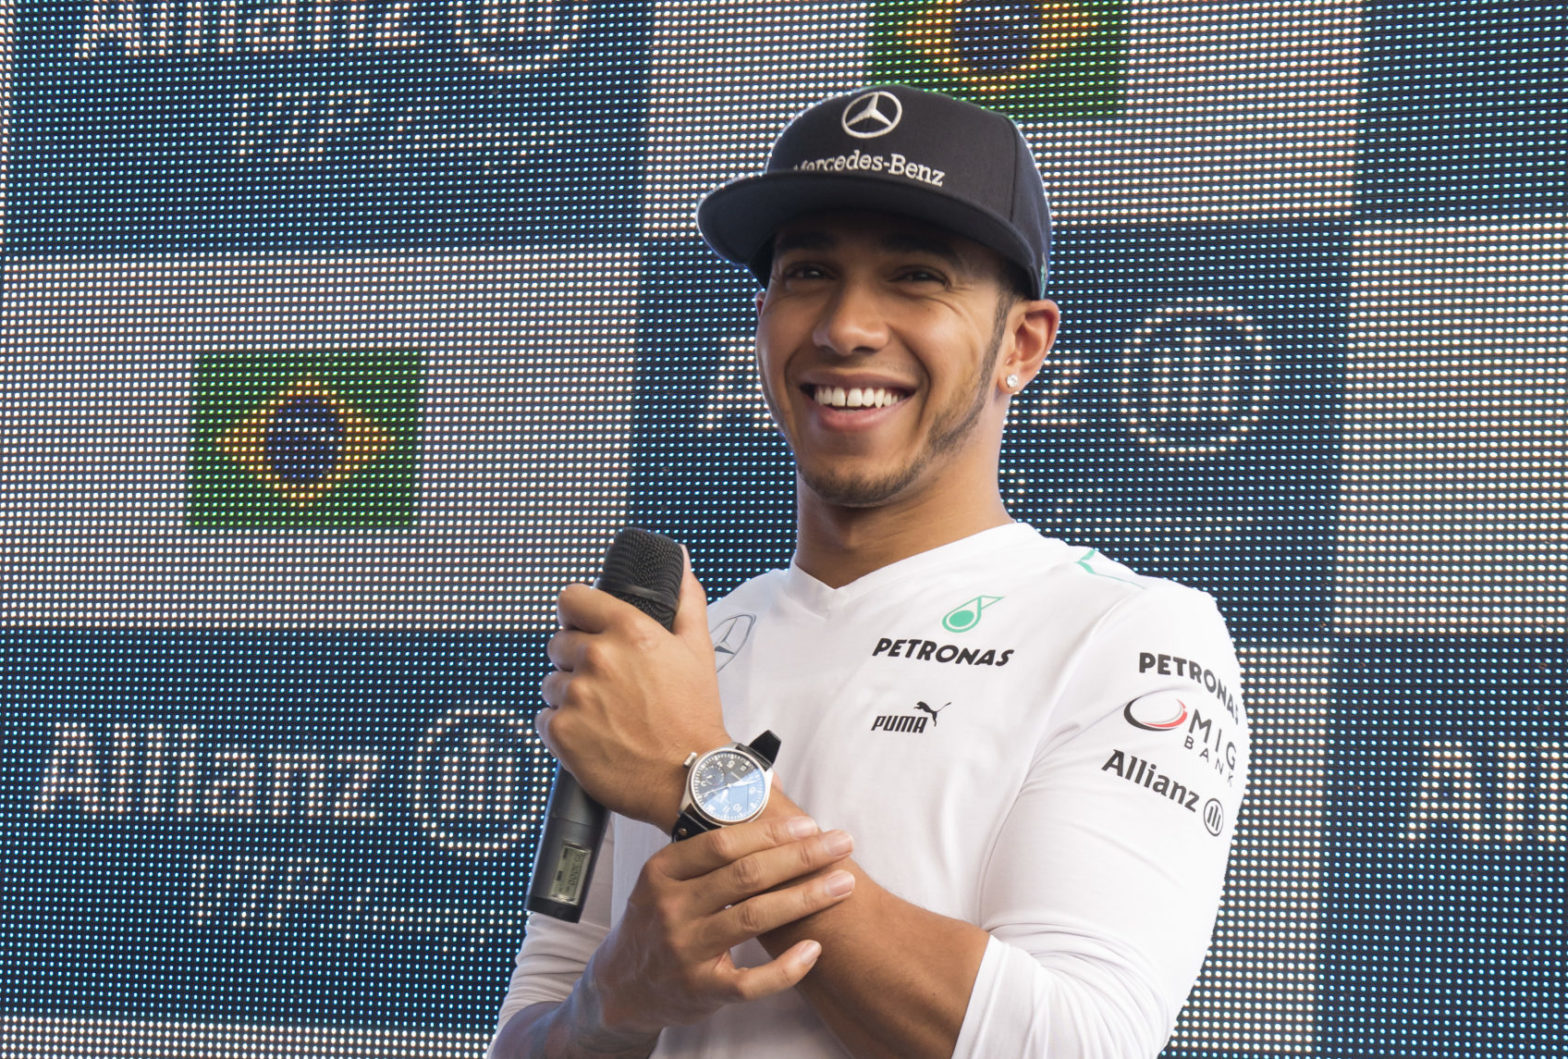 Lewis Hamilton 'Honored' By Brazilian Citizenship Consideration As He Expresses Appreciation For Brazilian Culture